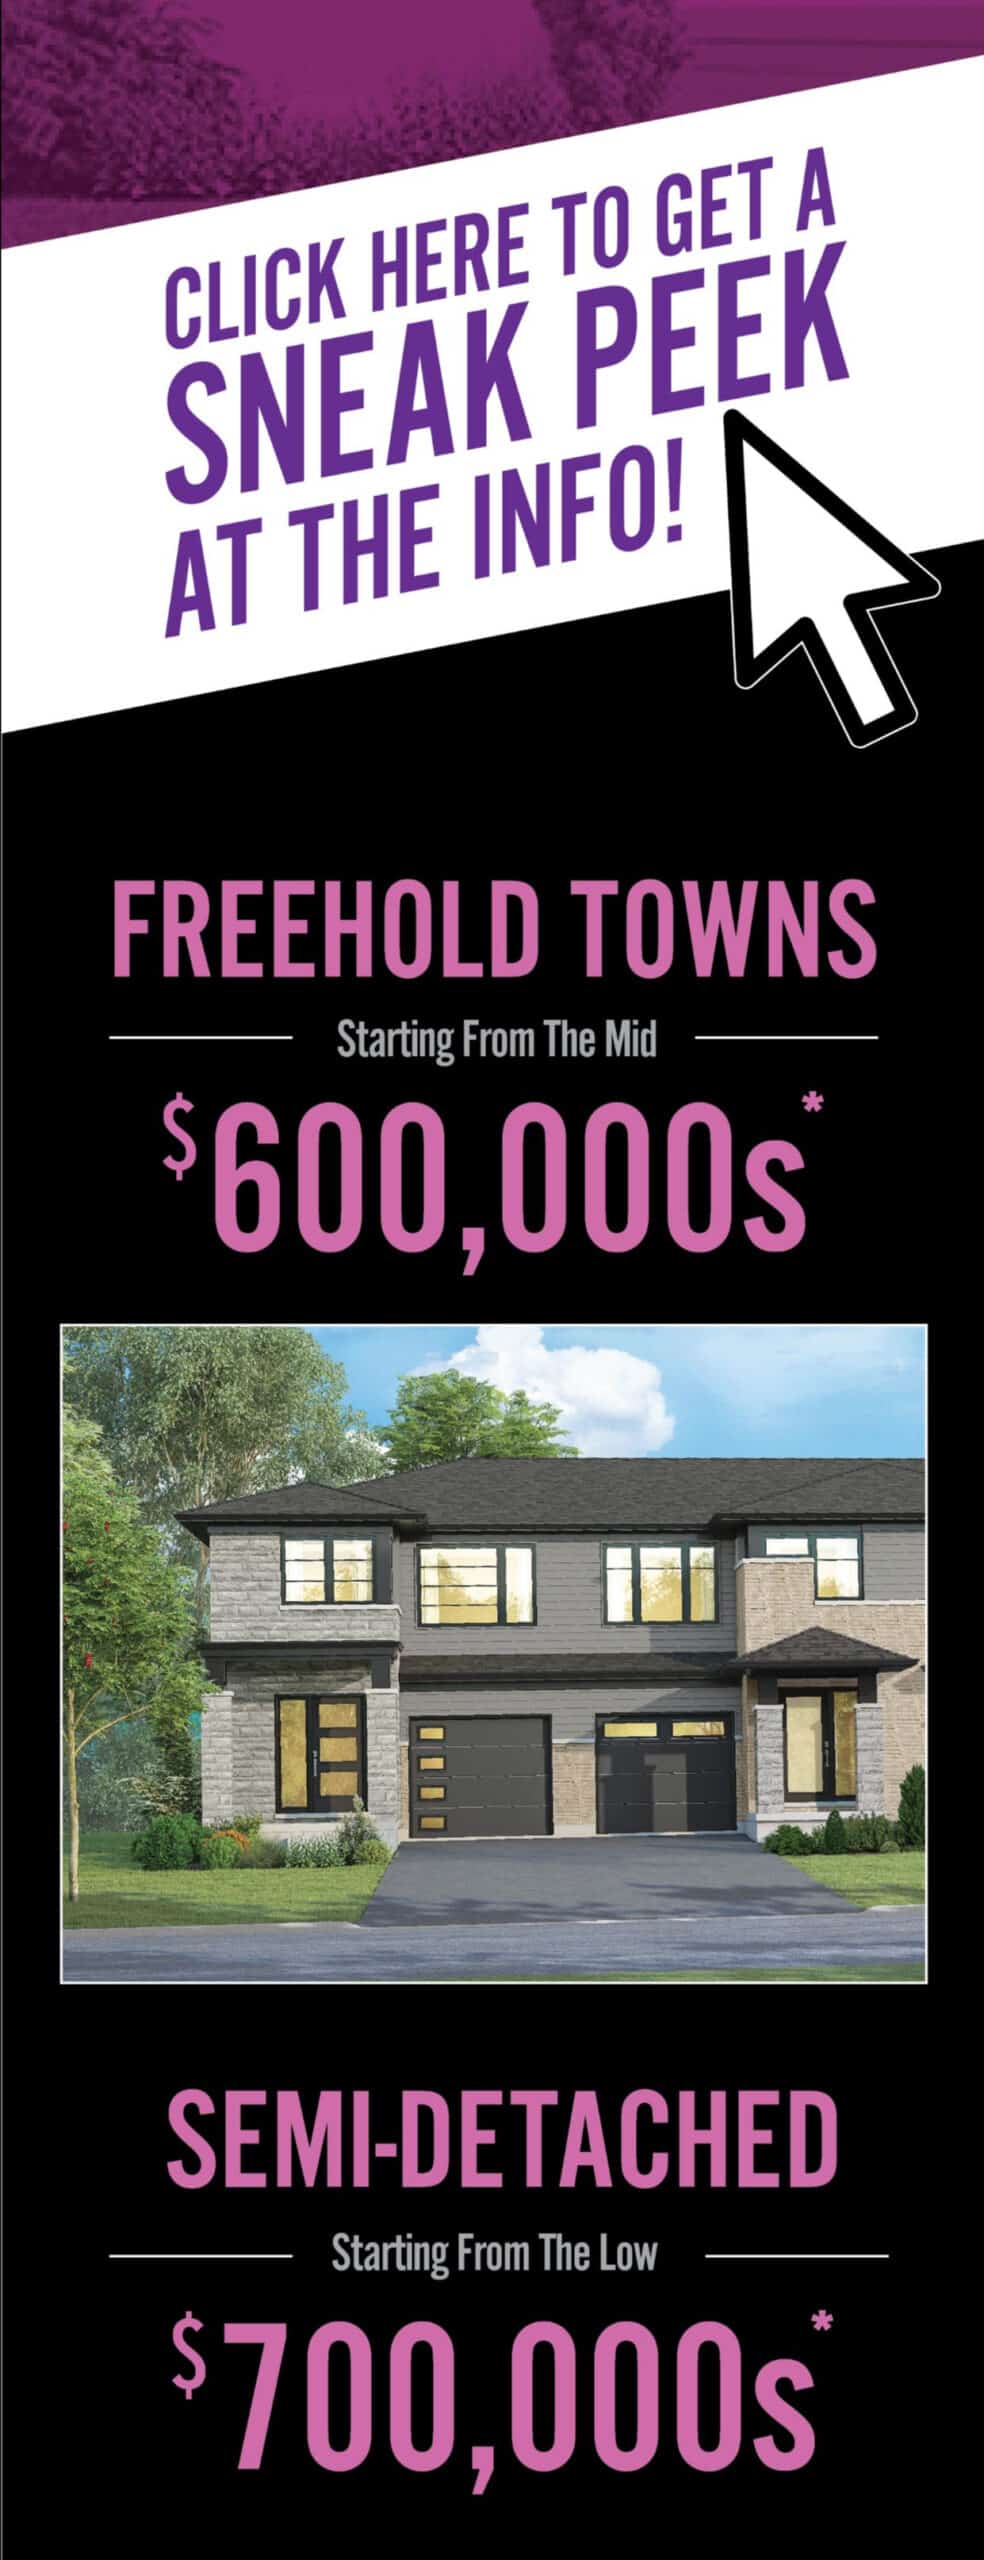 Introducing a Master Planned Community located in the heart of Fonthill in Pelham. - Saffron Estates